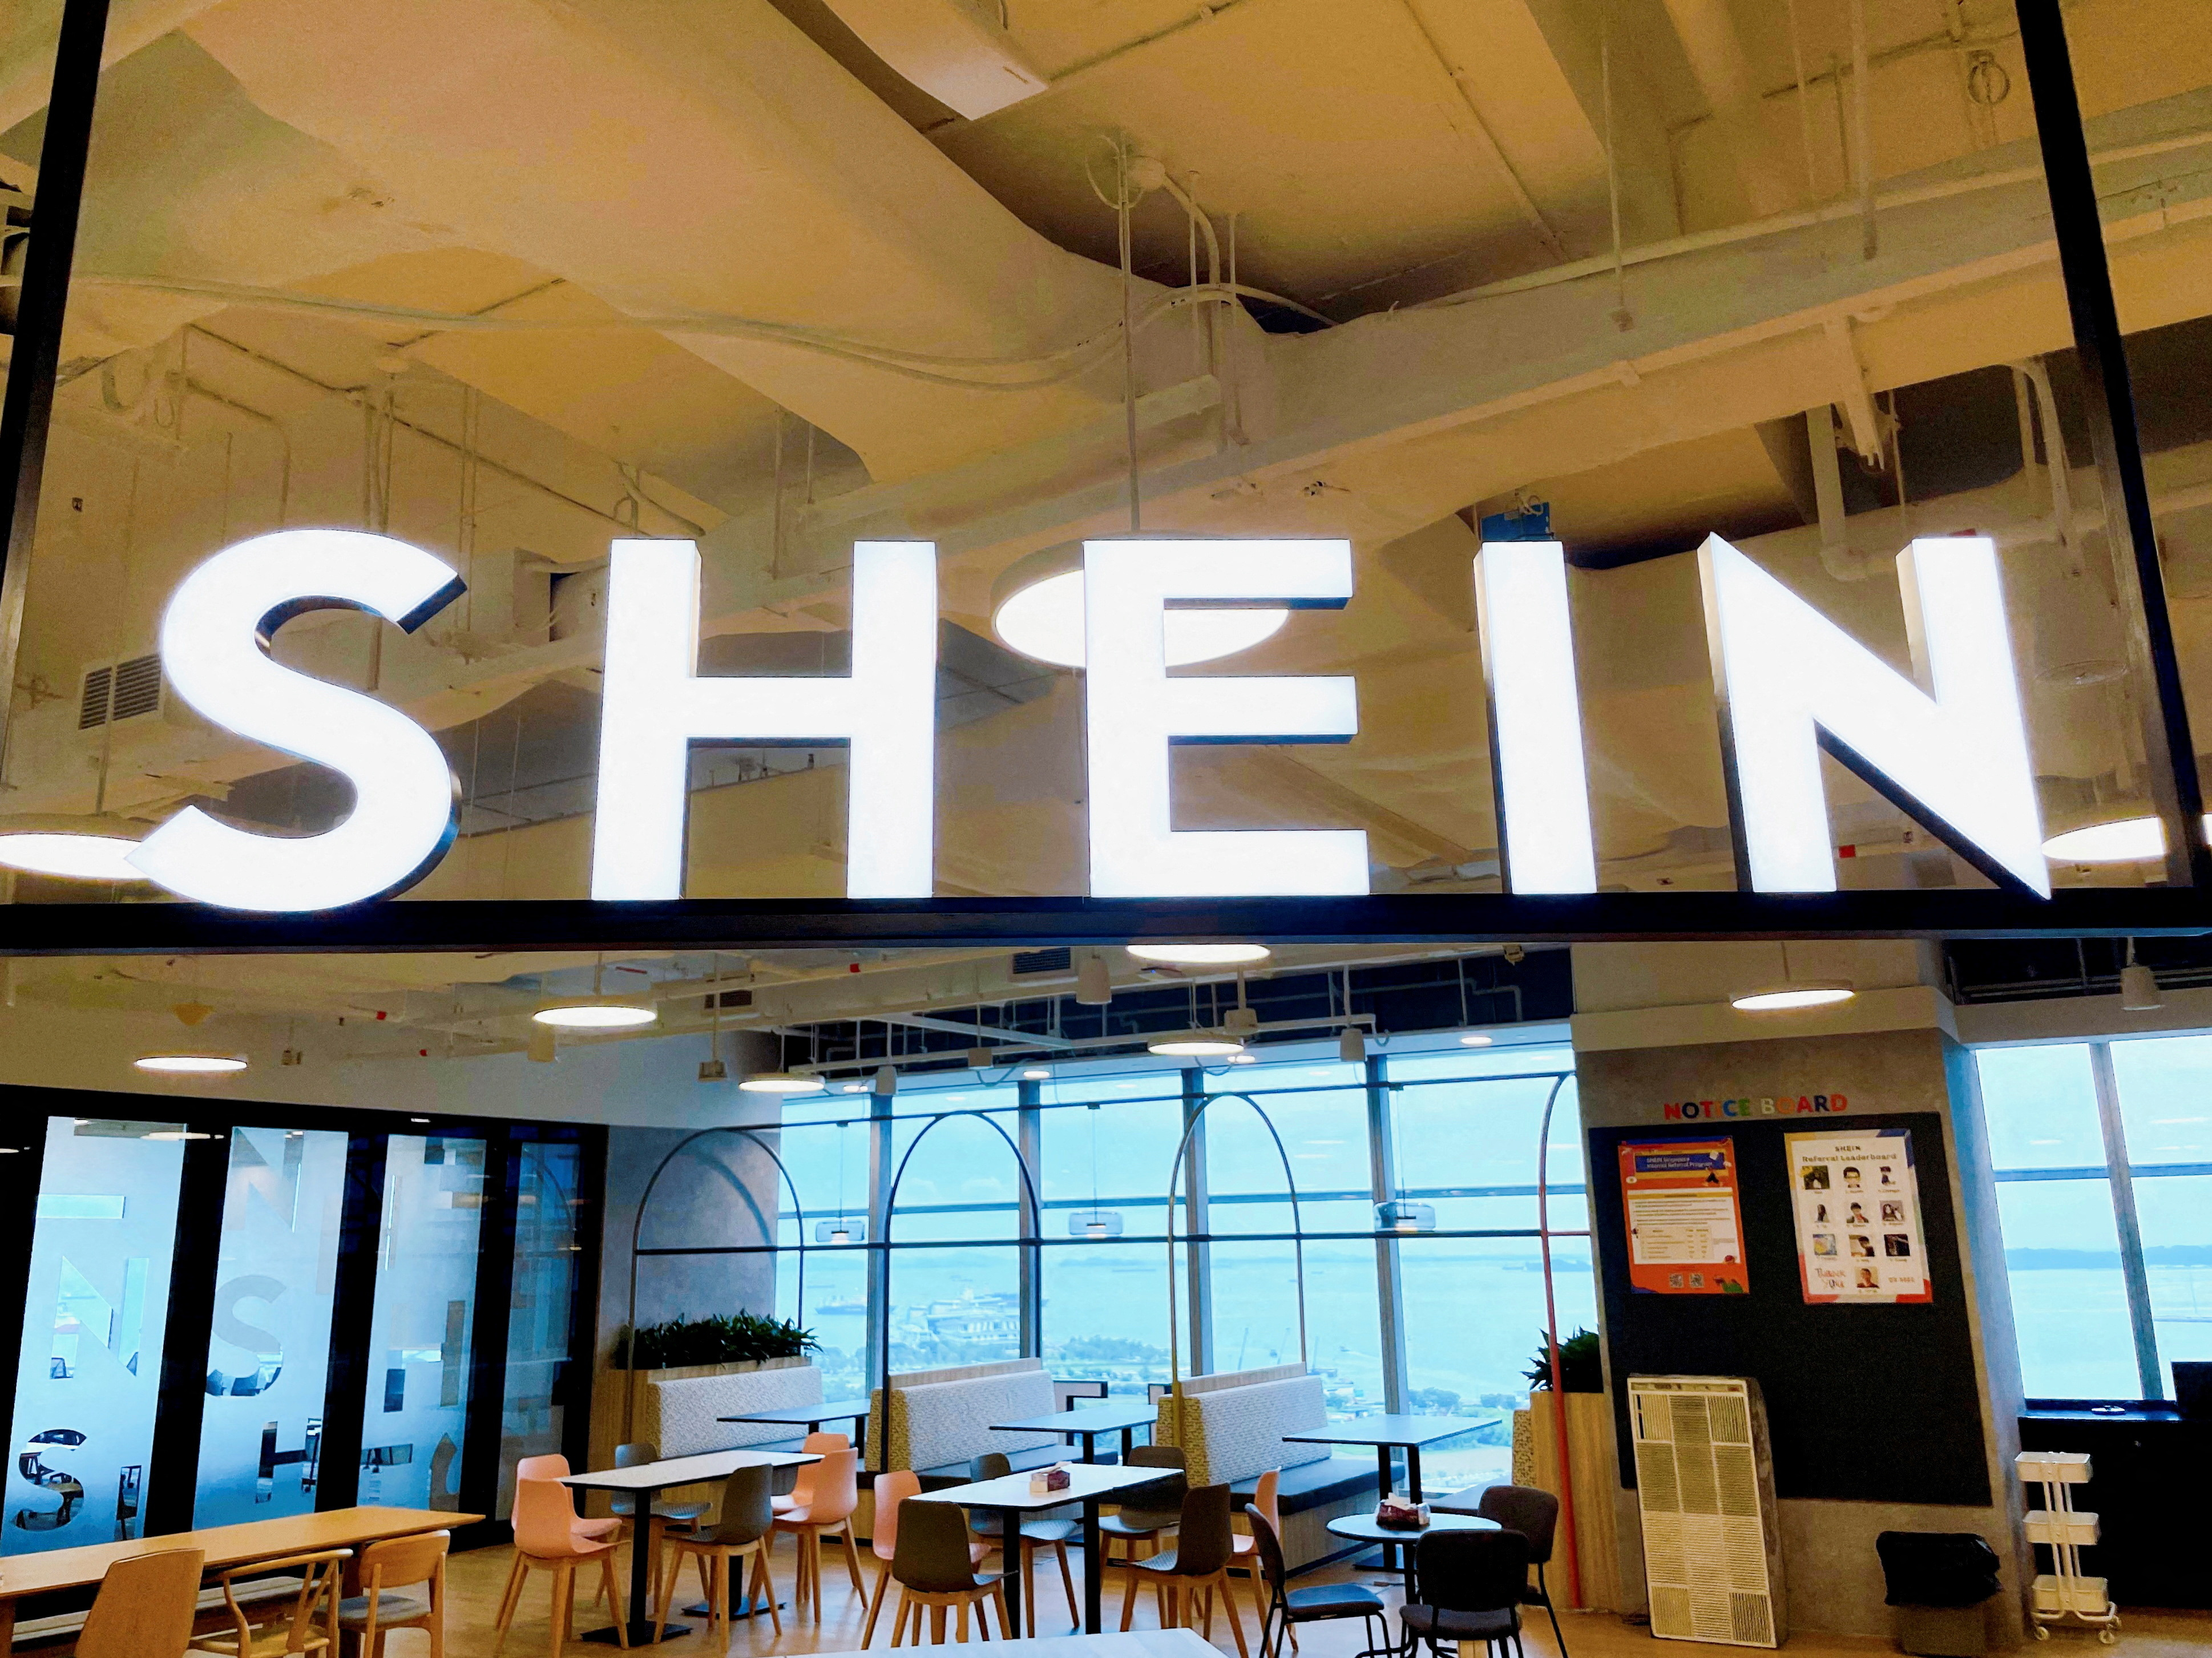 Shein holds largest U.S. fast fashion market share - Bloomberg